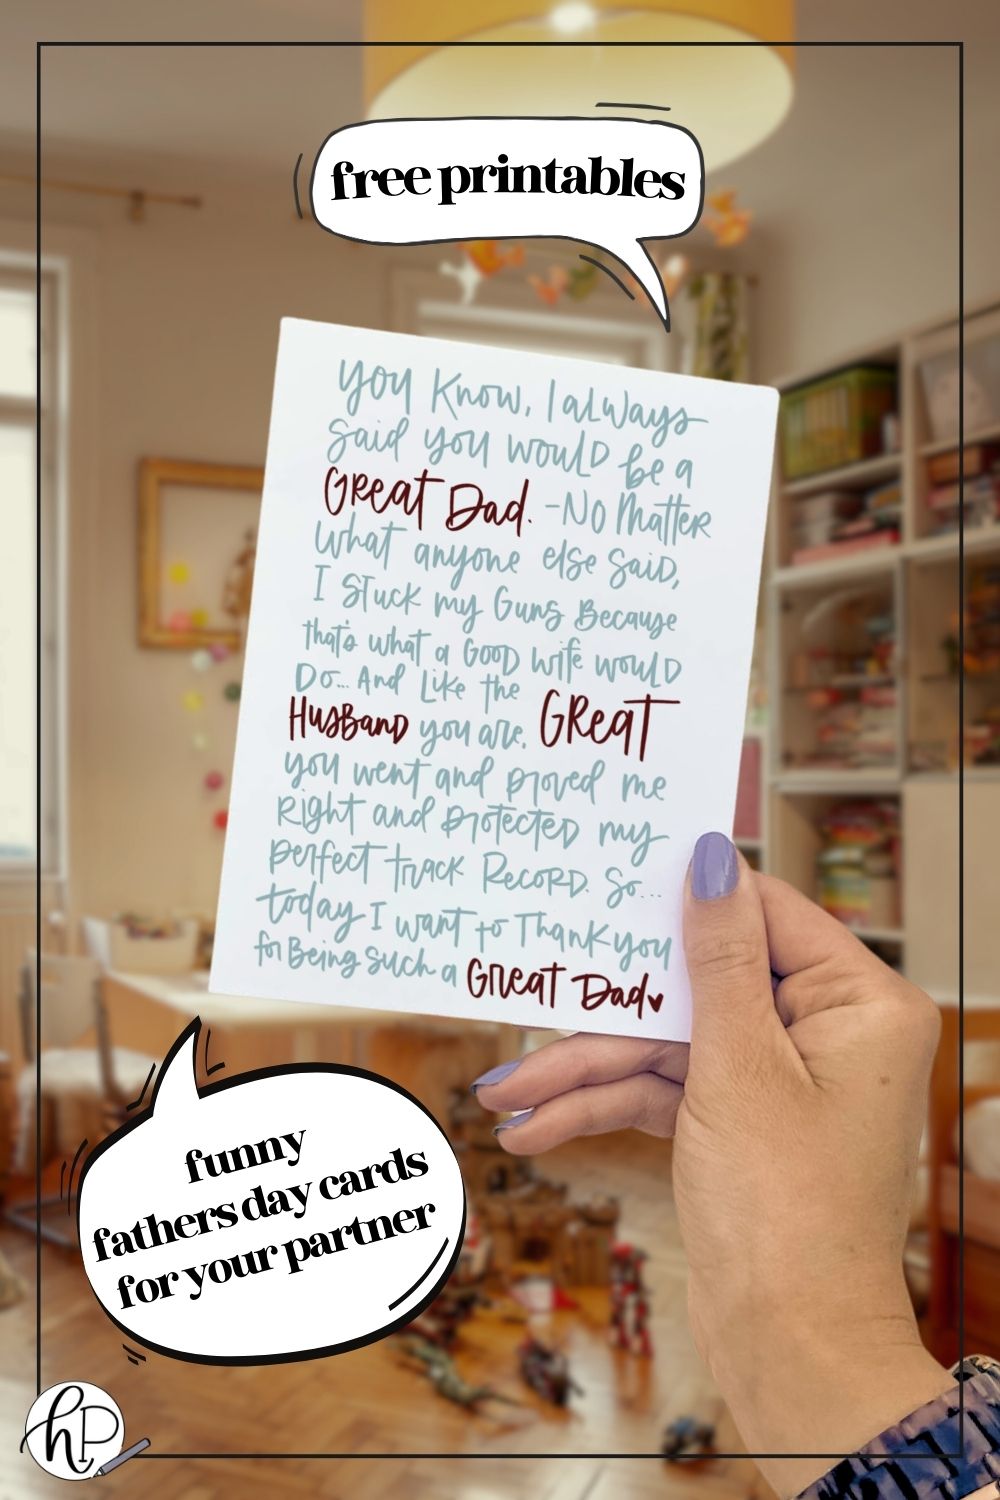 image of funny fathers day card: text over reads 'free printables' and 'funny fathers day cards for your partner' image shows woman's hand holding a card in a messy living room with baby in the background. card reads: you know, I always said you would be a great dad. no matter what anyone else said, I stuck to my guns because that's what a good wife would do. And like the Great husband that you are, you went and proved me right and protected my perfect track record. So today I want to thank you for being such a great dad.